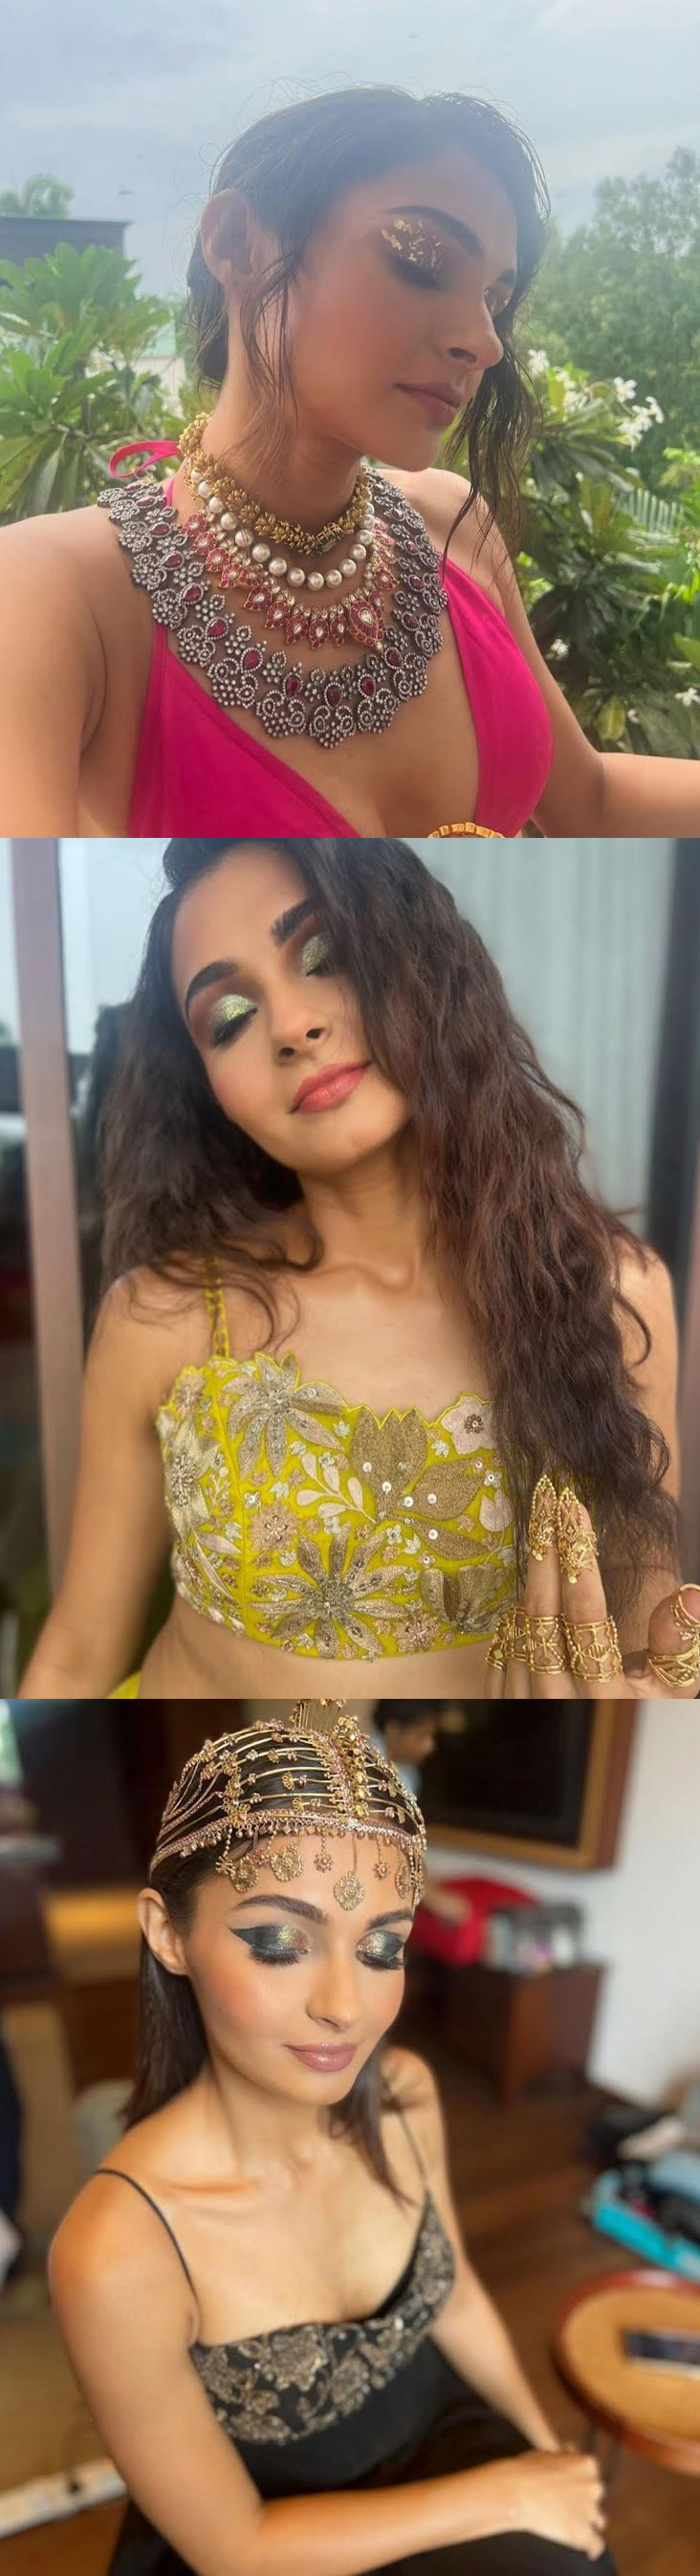 poses in lehnga choli Also You Can Try It On Salwar Suit 😊😍🔥🦋❣️📸|... |  TikTok